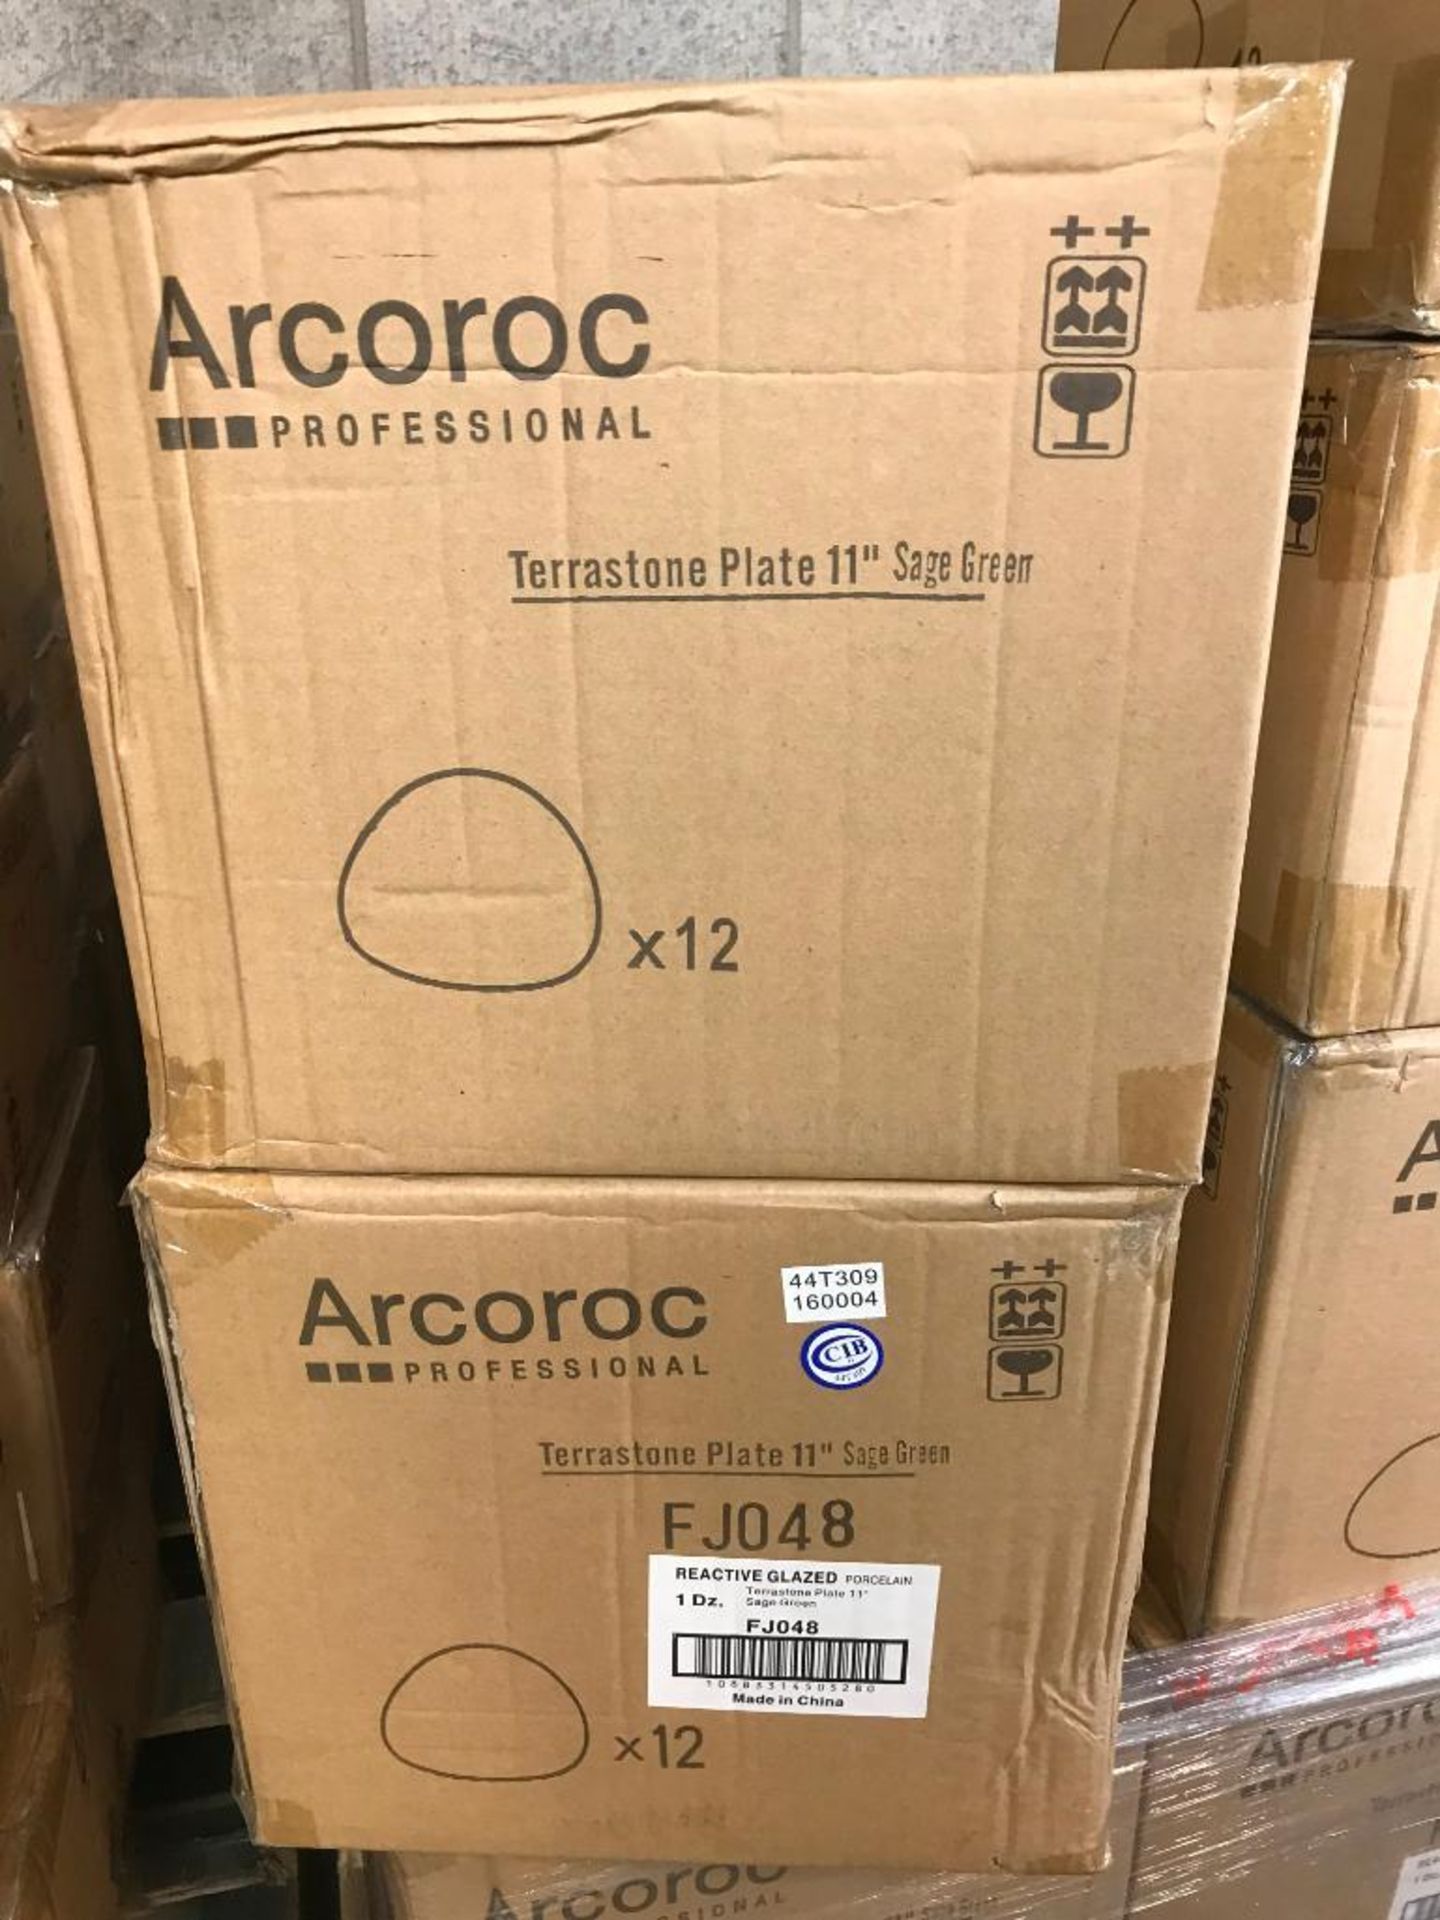 2 CASES OF TERRASTONE 11" SAGE GREEN PLATE - 12/CASE, ARCOROC - NEW - Image 2 of 3